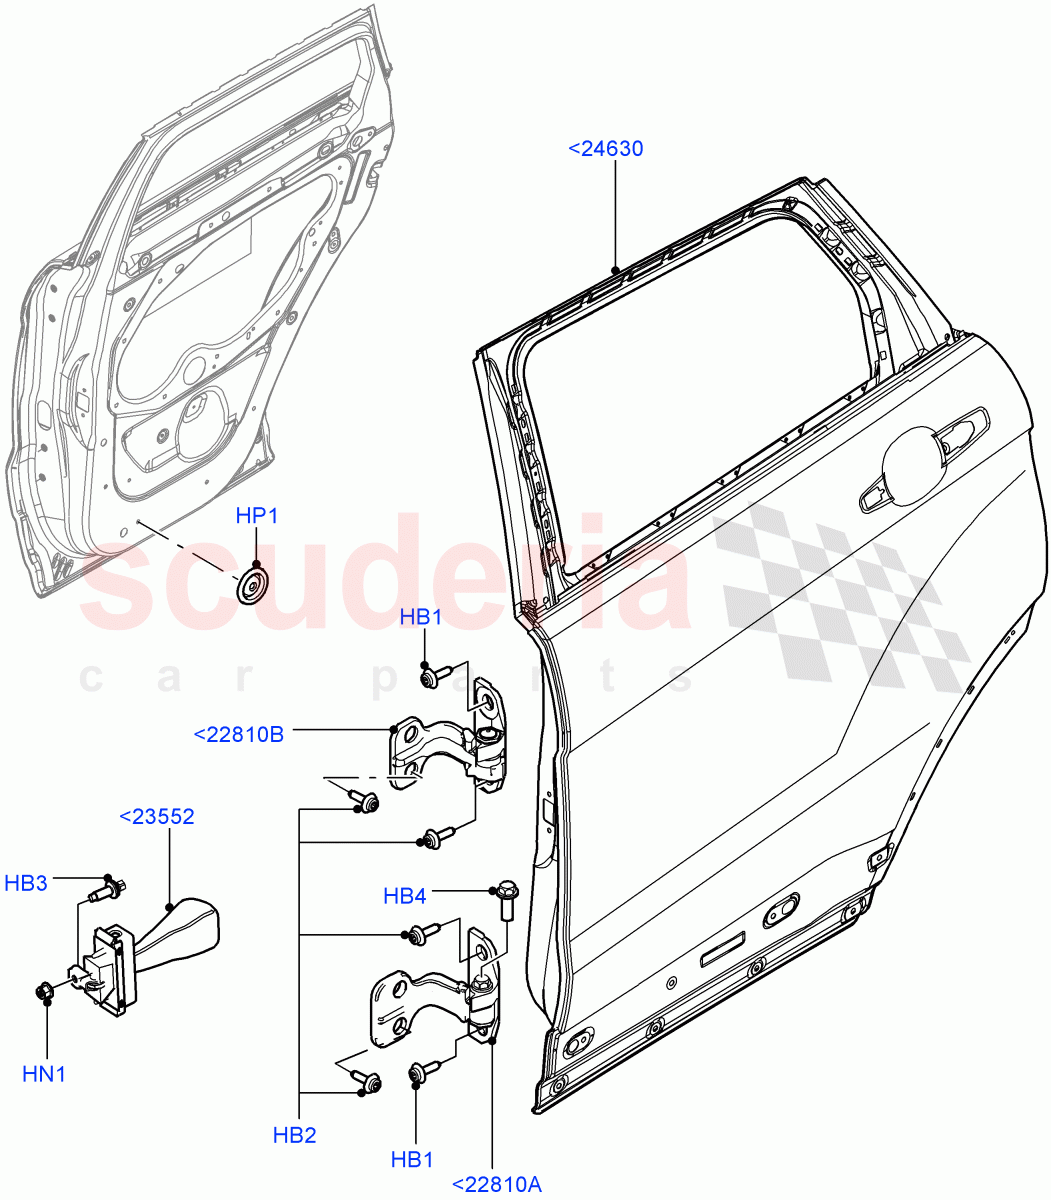 Rear Doors, Hinges & Weatherstrips(Door And Fixings)(Changsu (China))((V)FROMEG000001) of Land Rover Land Rover Range Rover Evoque (2012-2018) [2.0 Turbo Diesel]